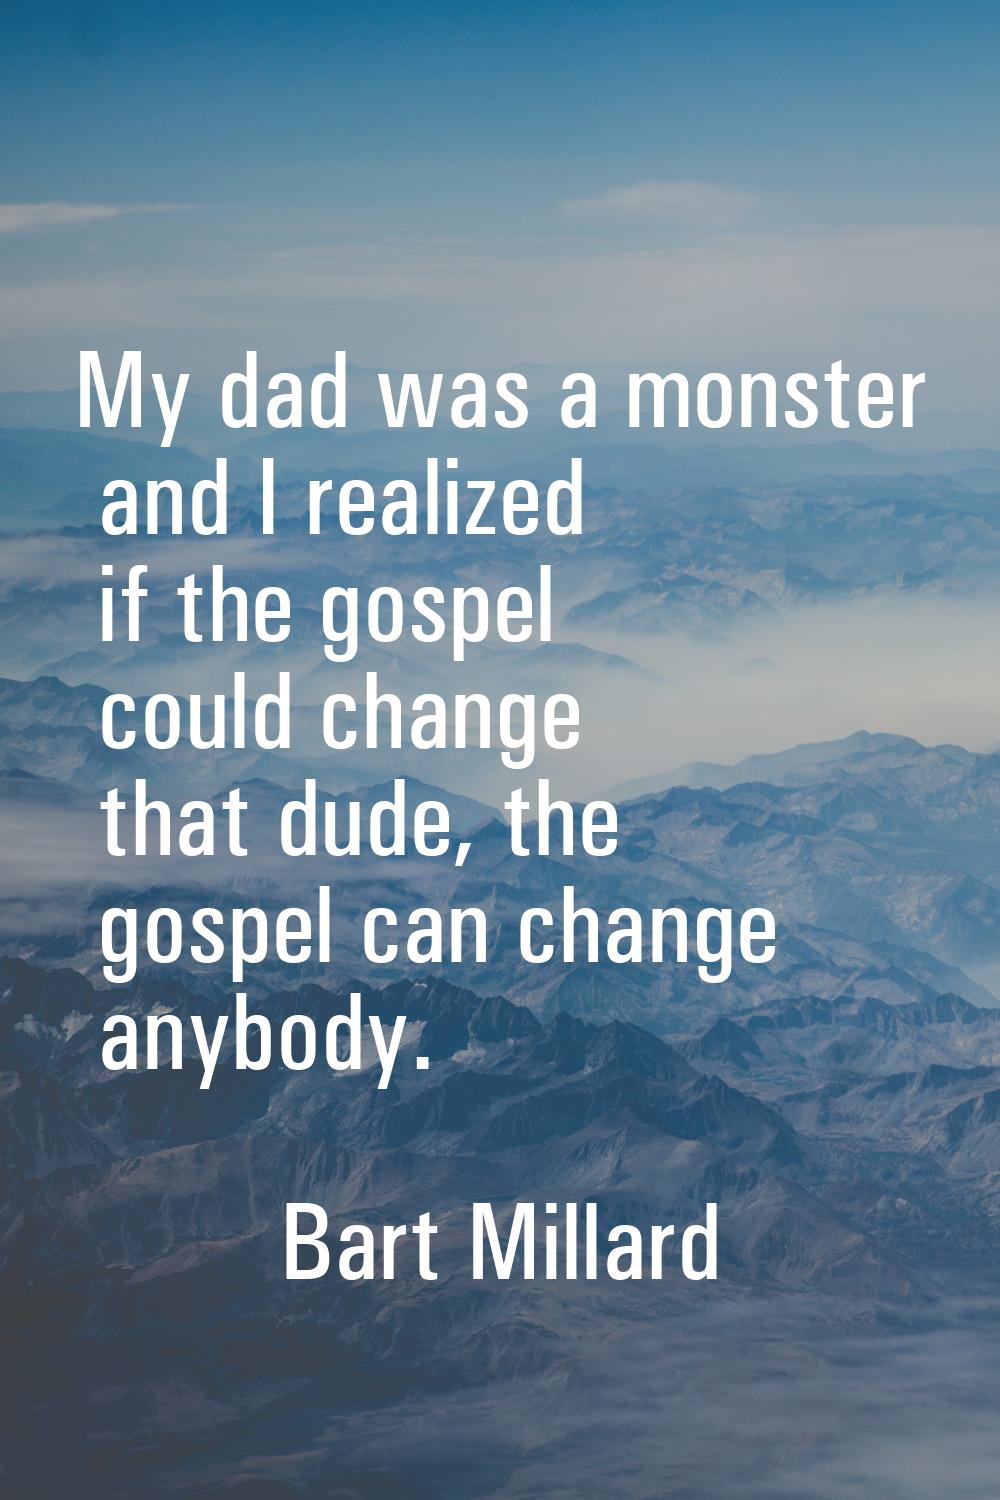 My dad was a monster and I realized if the gospel could change that dude, the gospel can change any